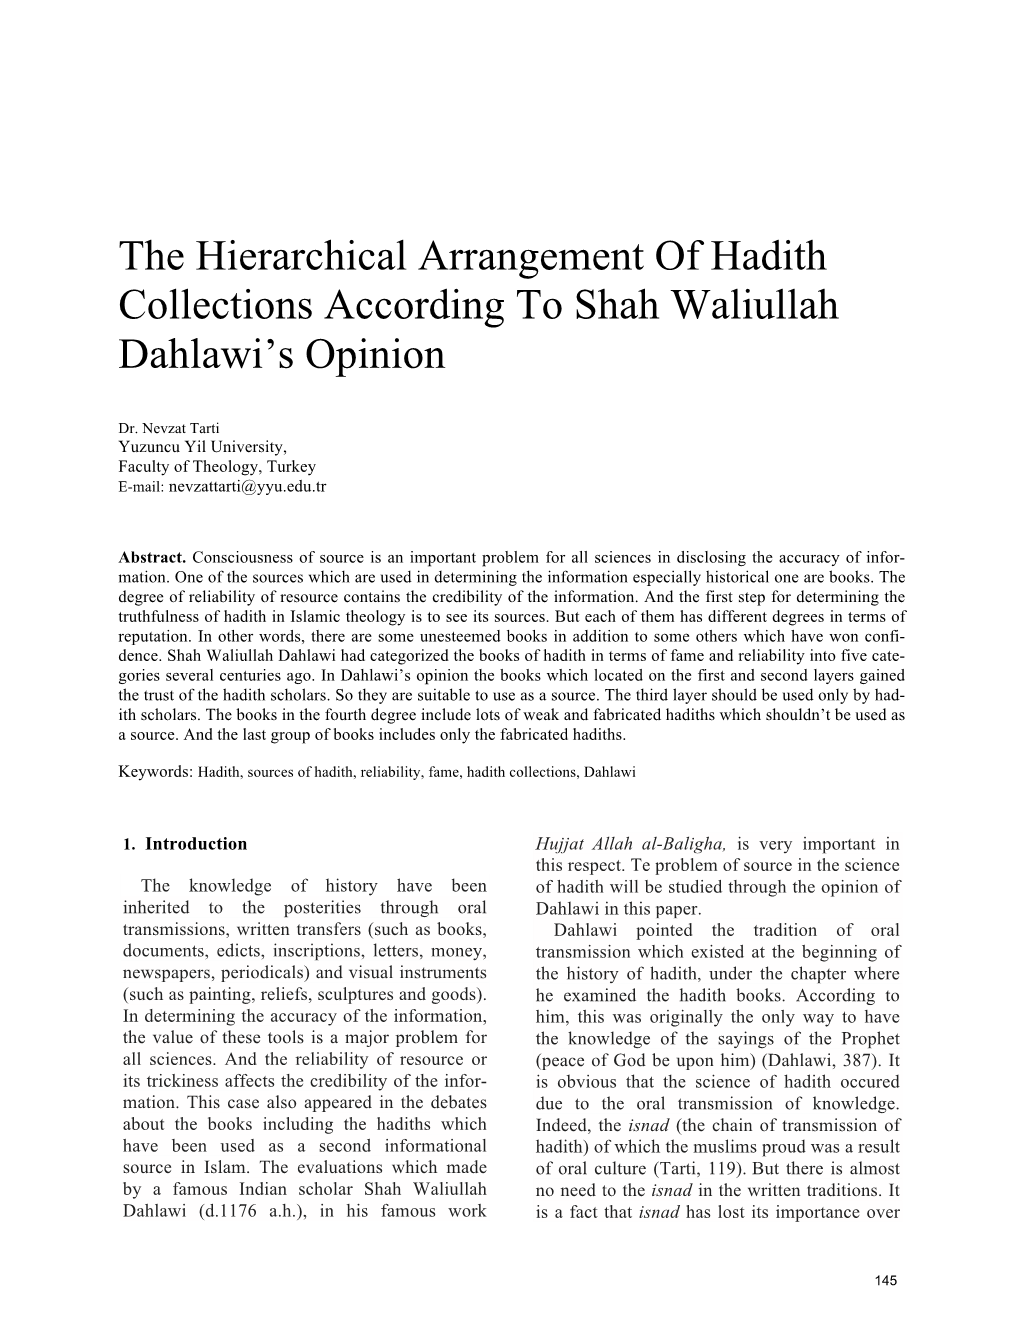 The Hierarchical Arrangement of Hadith Collections According to Shah Waliullah Dahlawi’S Opinion